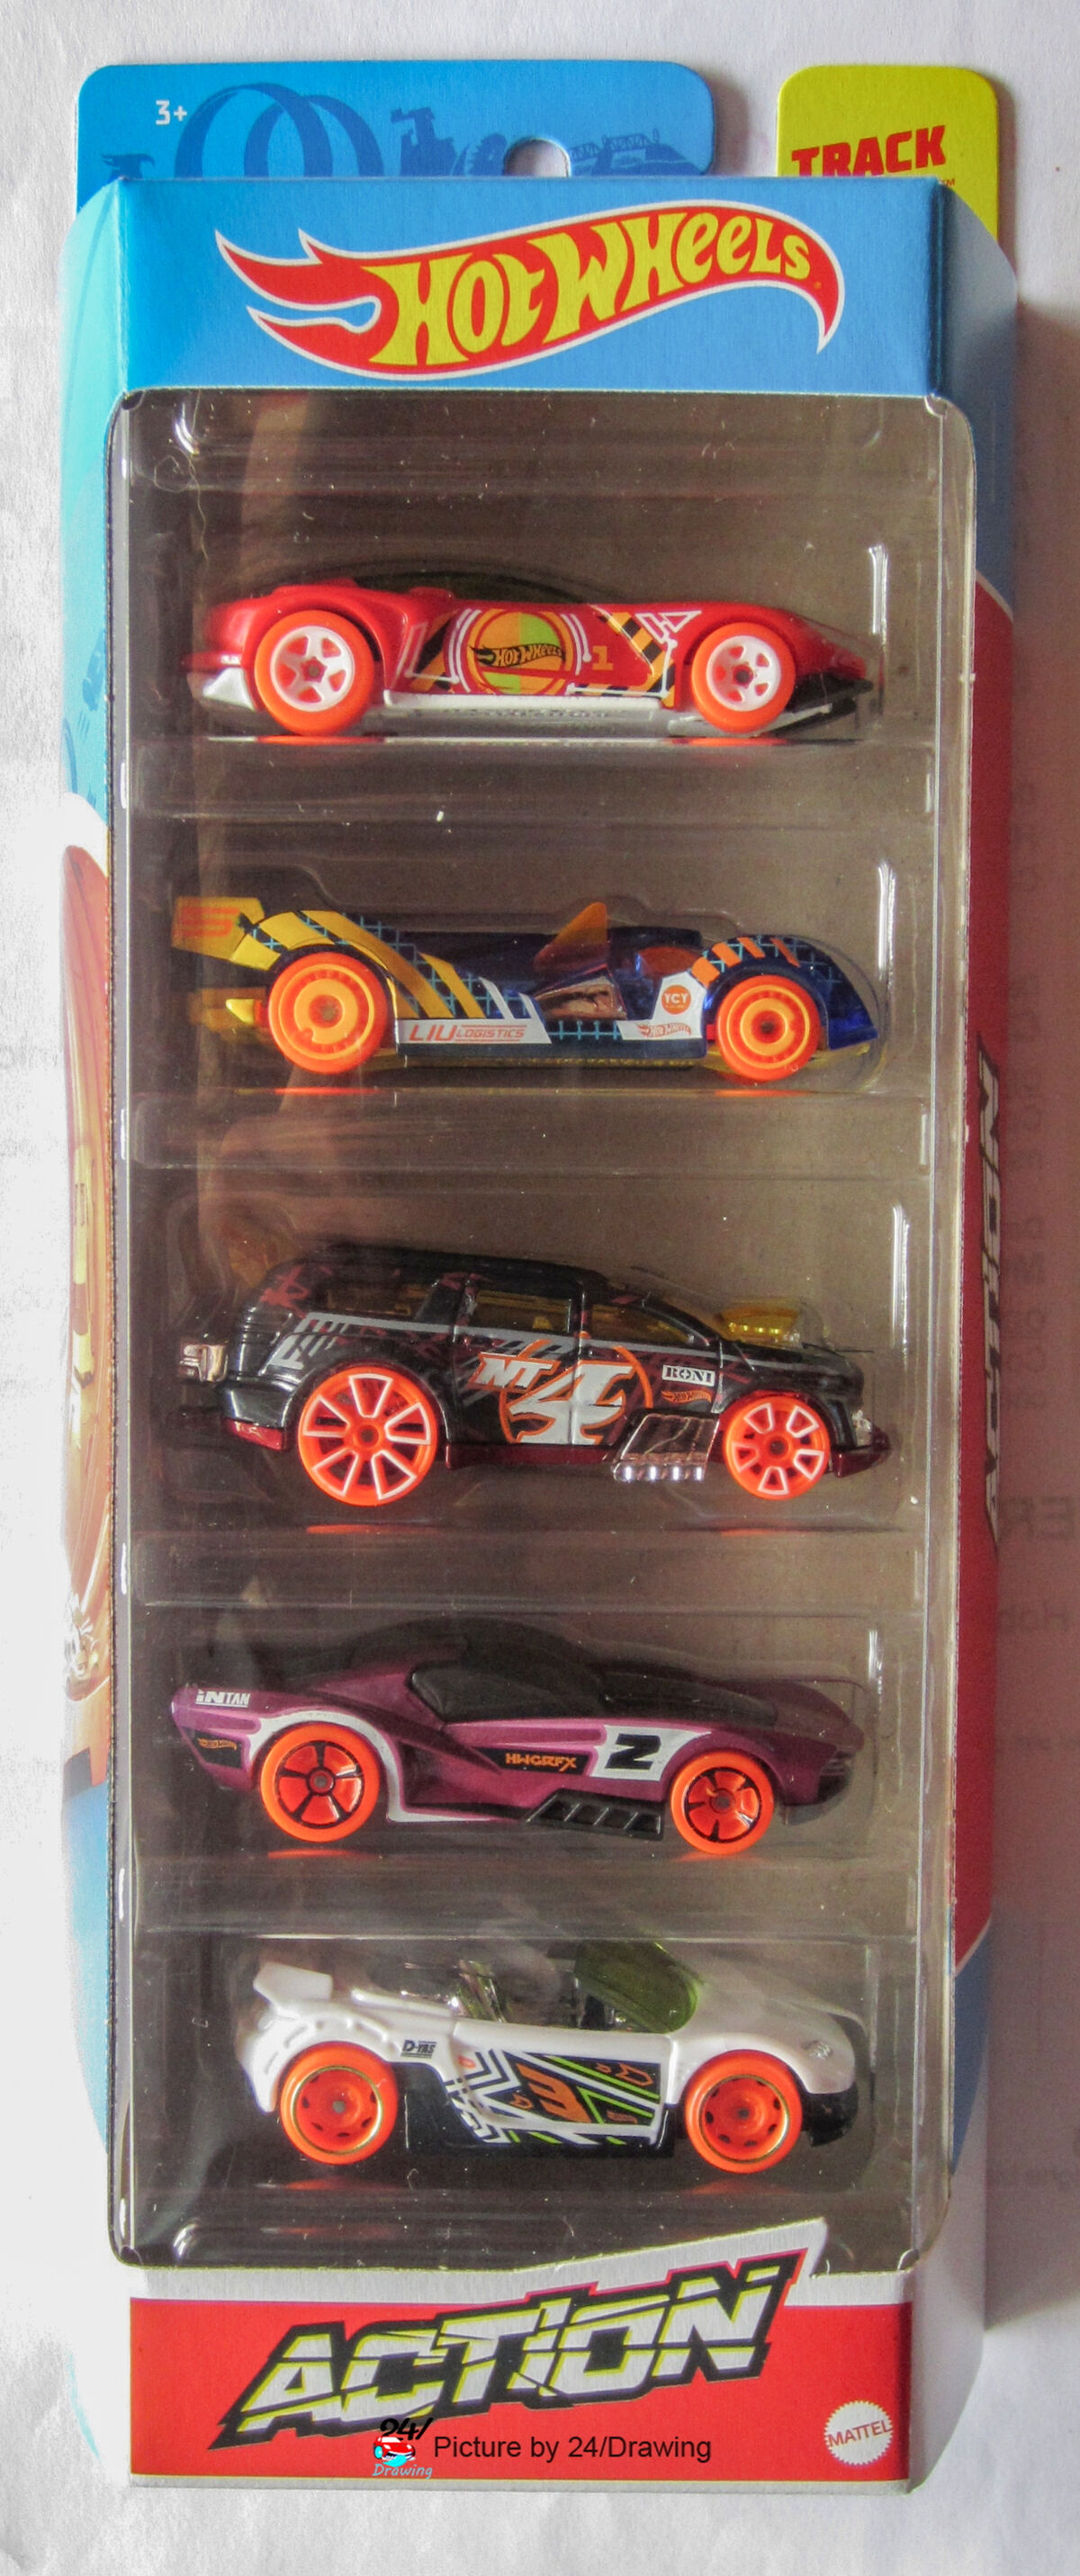 Action 5-Pack (2021), Hot Wheels Wiki